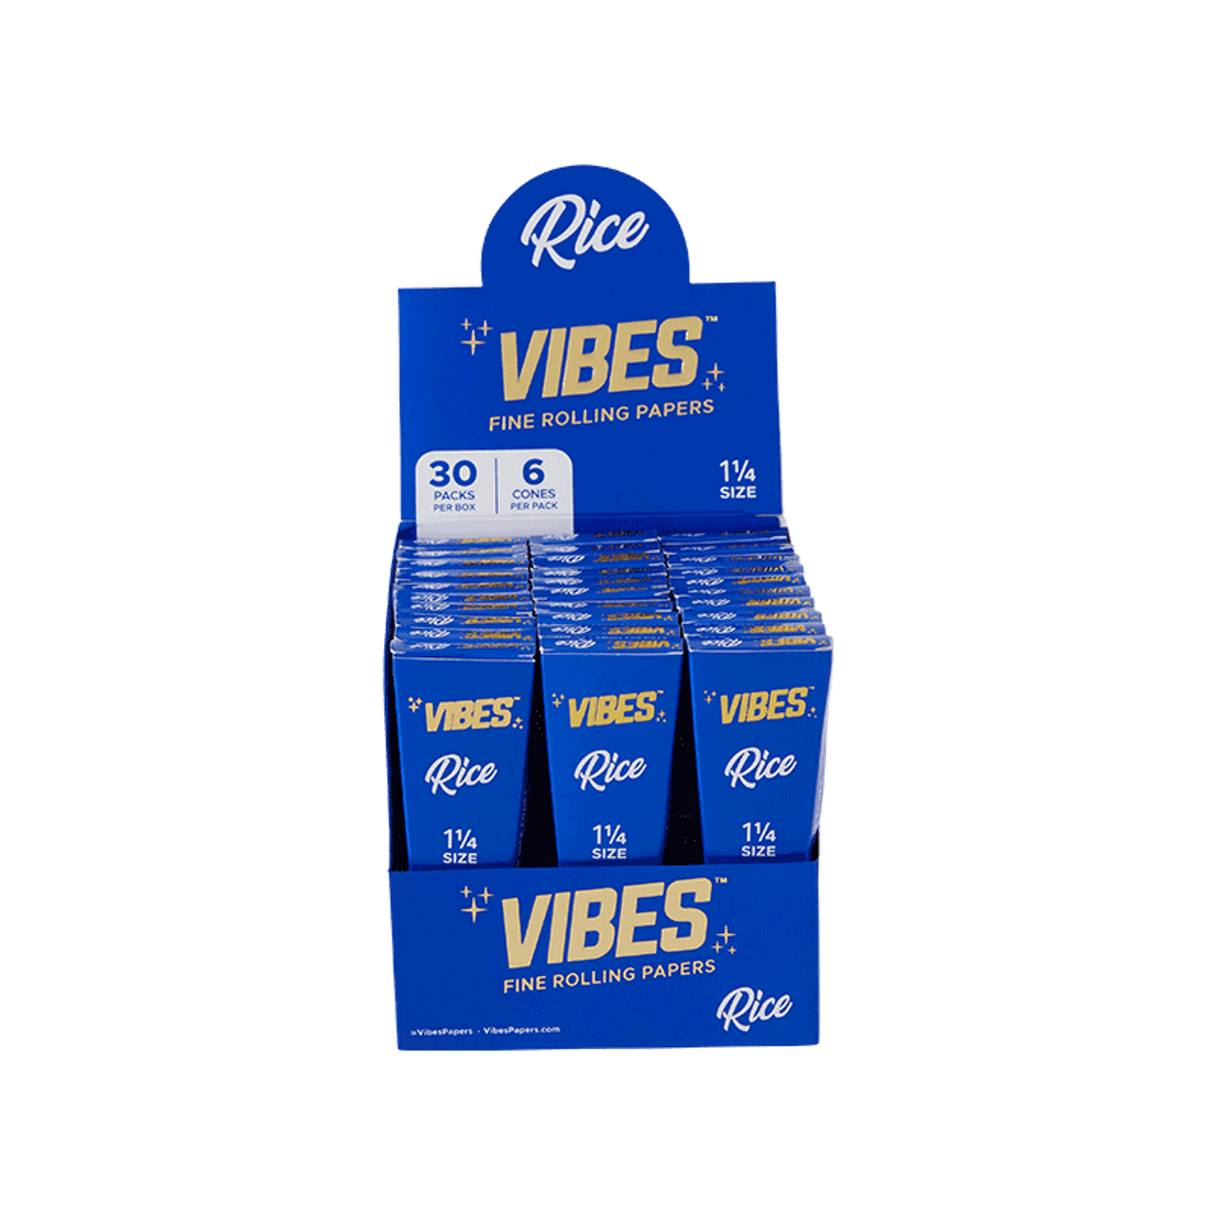 Vibes King Size Cones Box in Blue, 180pk Rice Rolling Papers, Front View